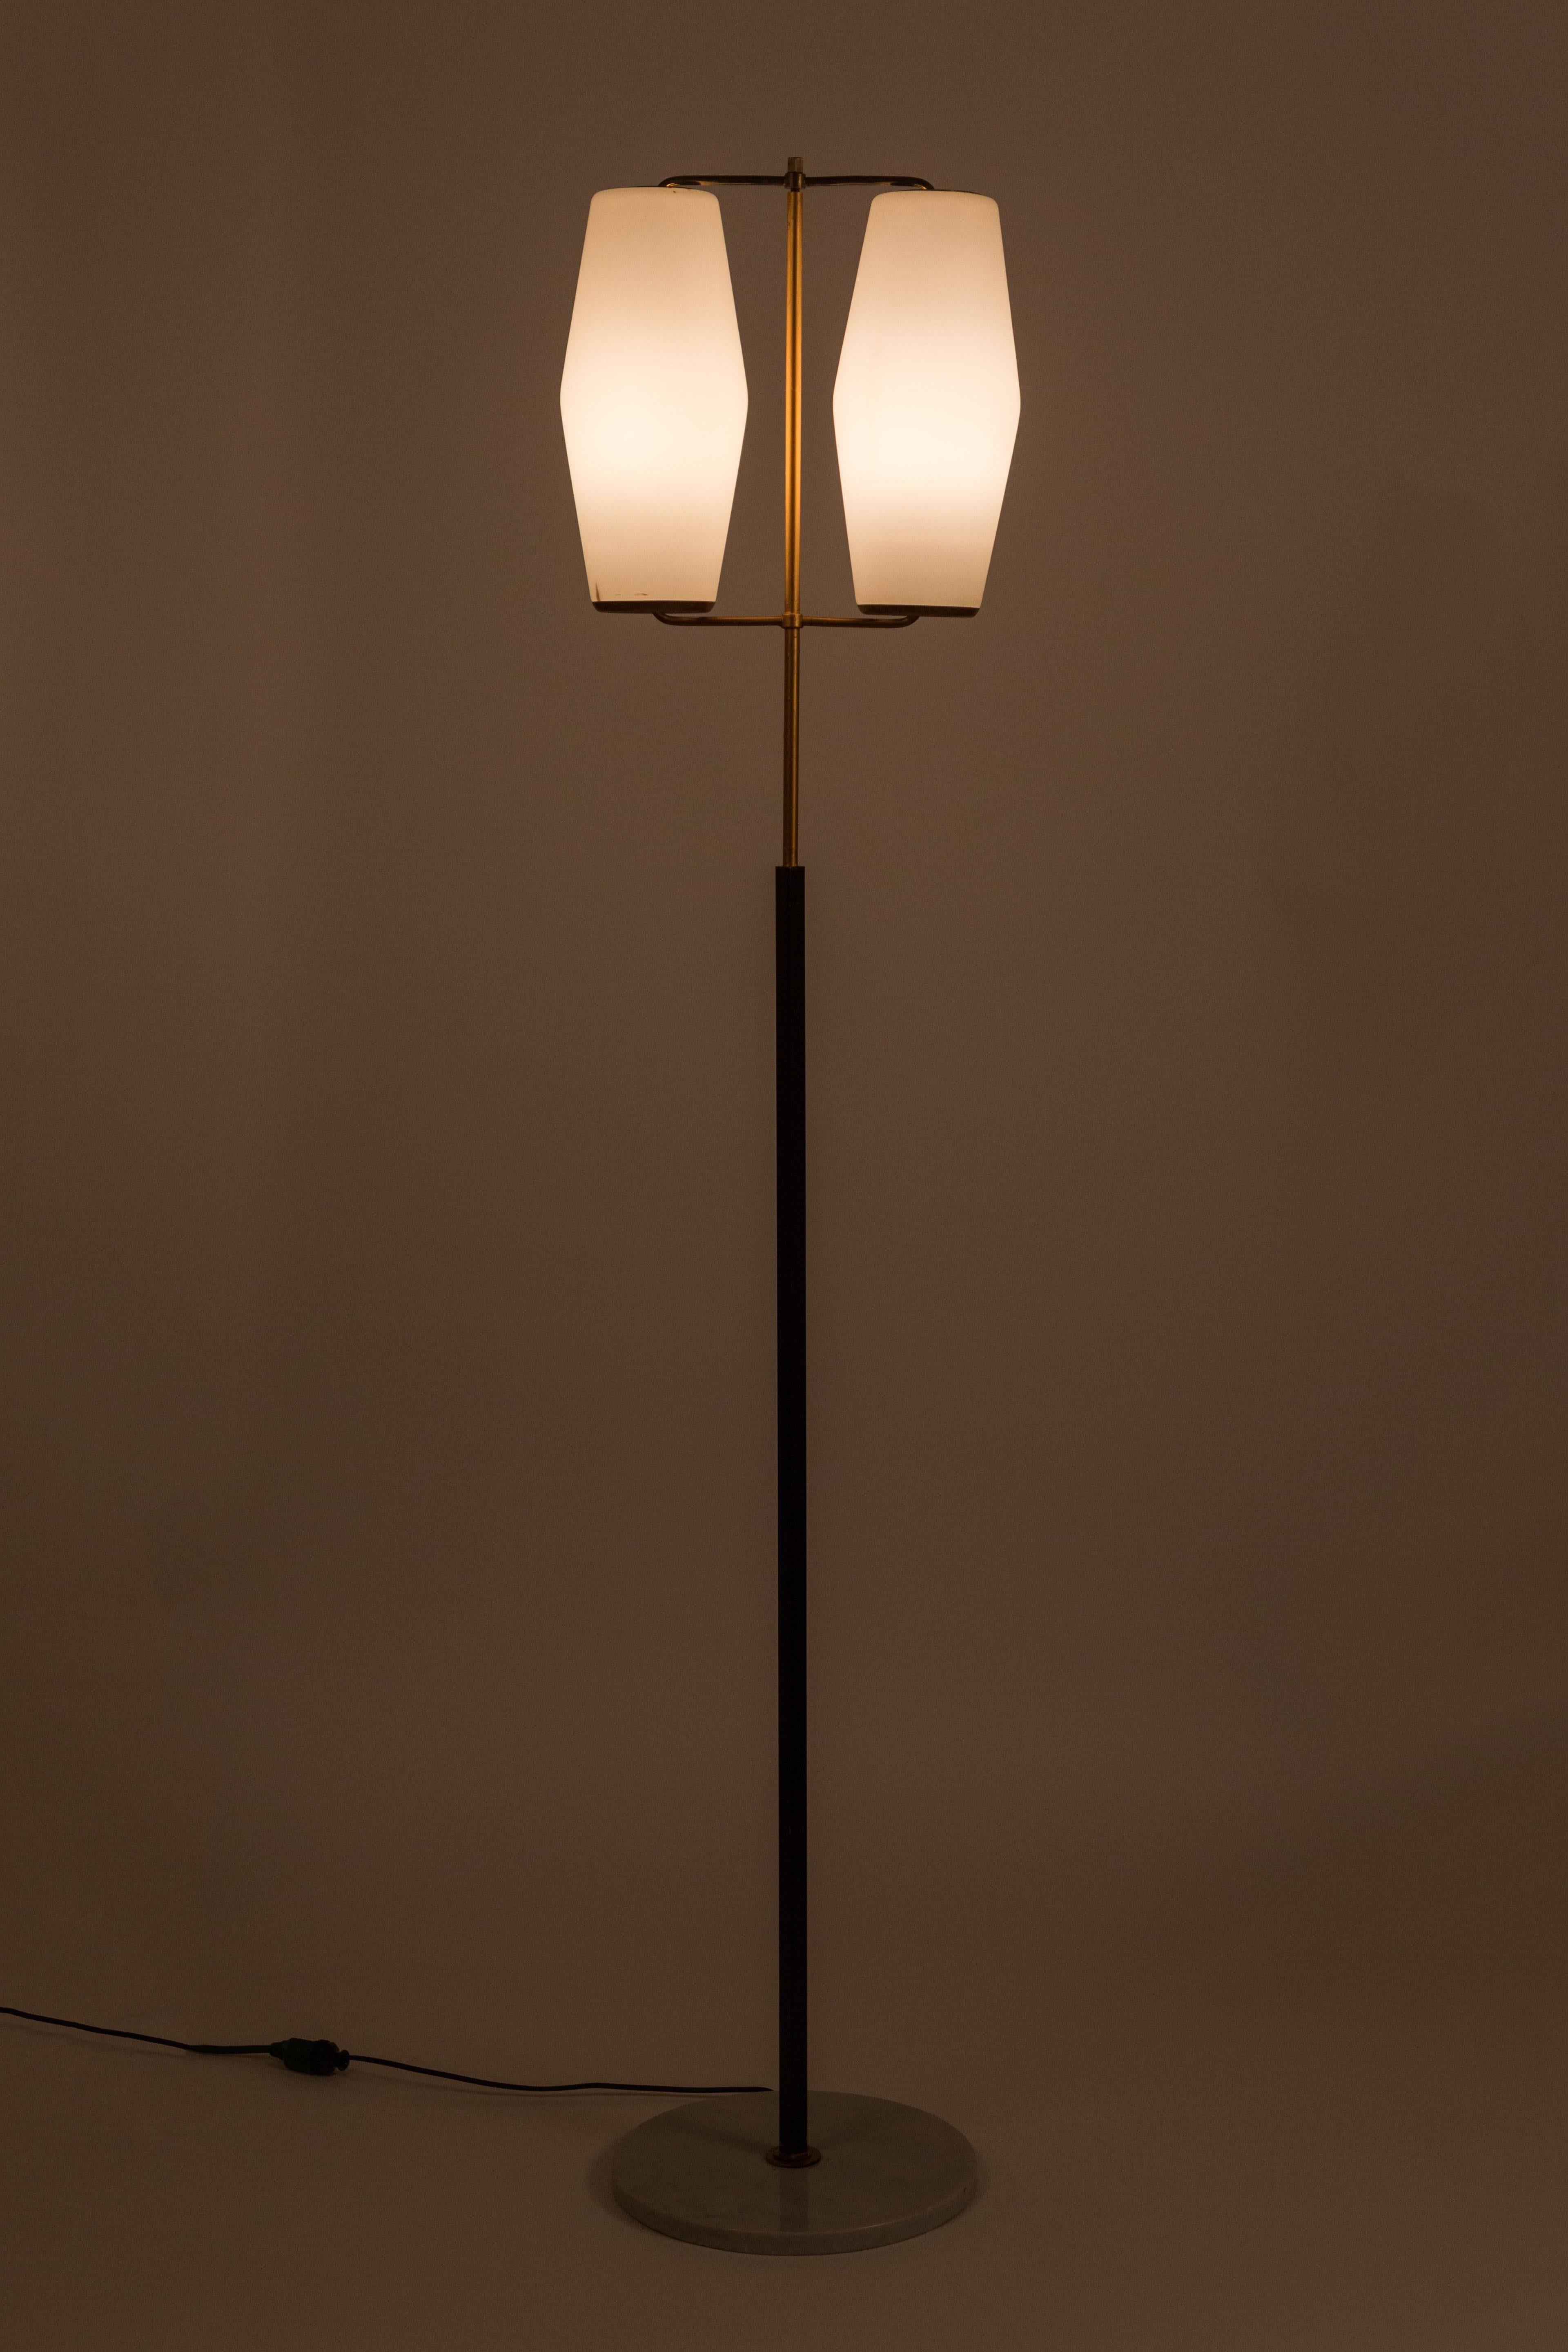 Large brass and metal floor lamp with two white glass shades and marble base by Stilnovo. Lamp retains original manufacturers label. Original wiring. Shades take E27 75w maximum bulbs.